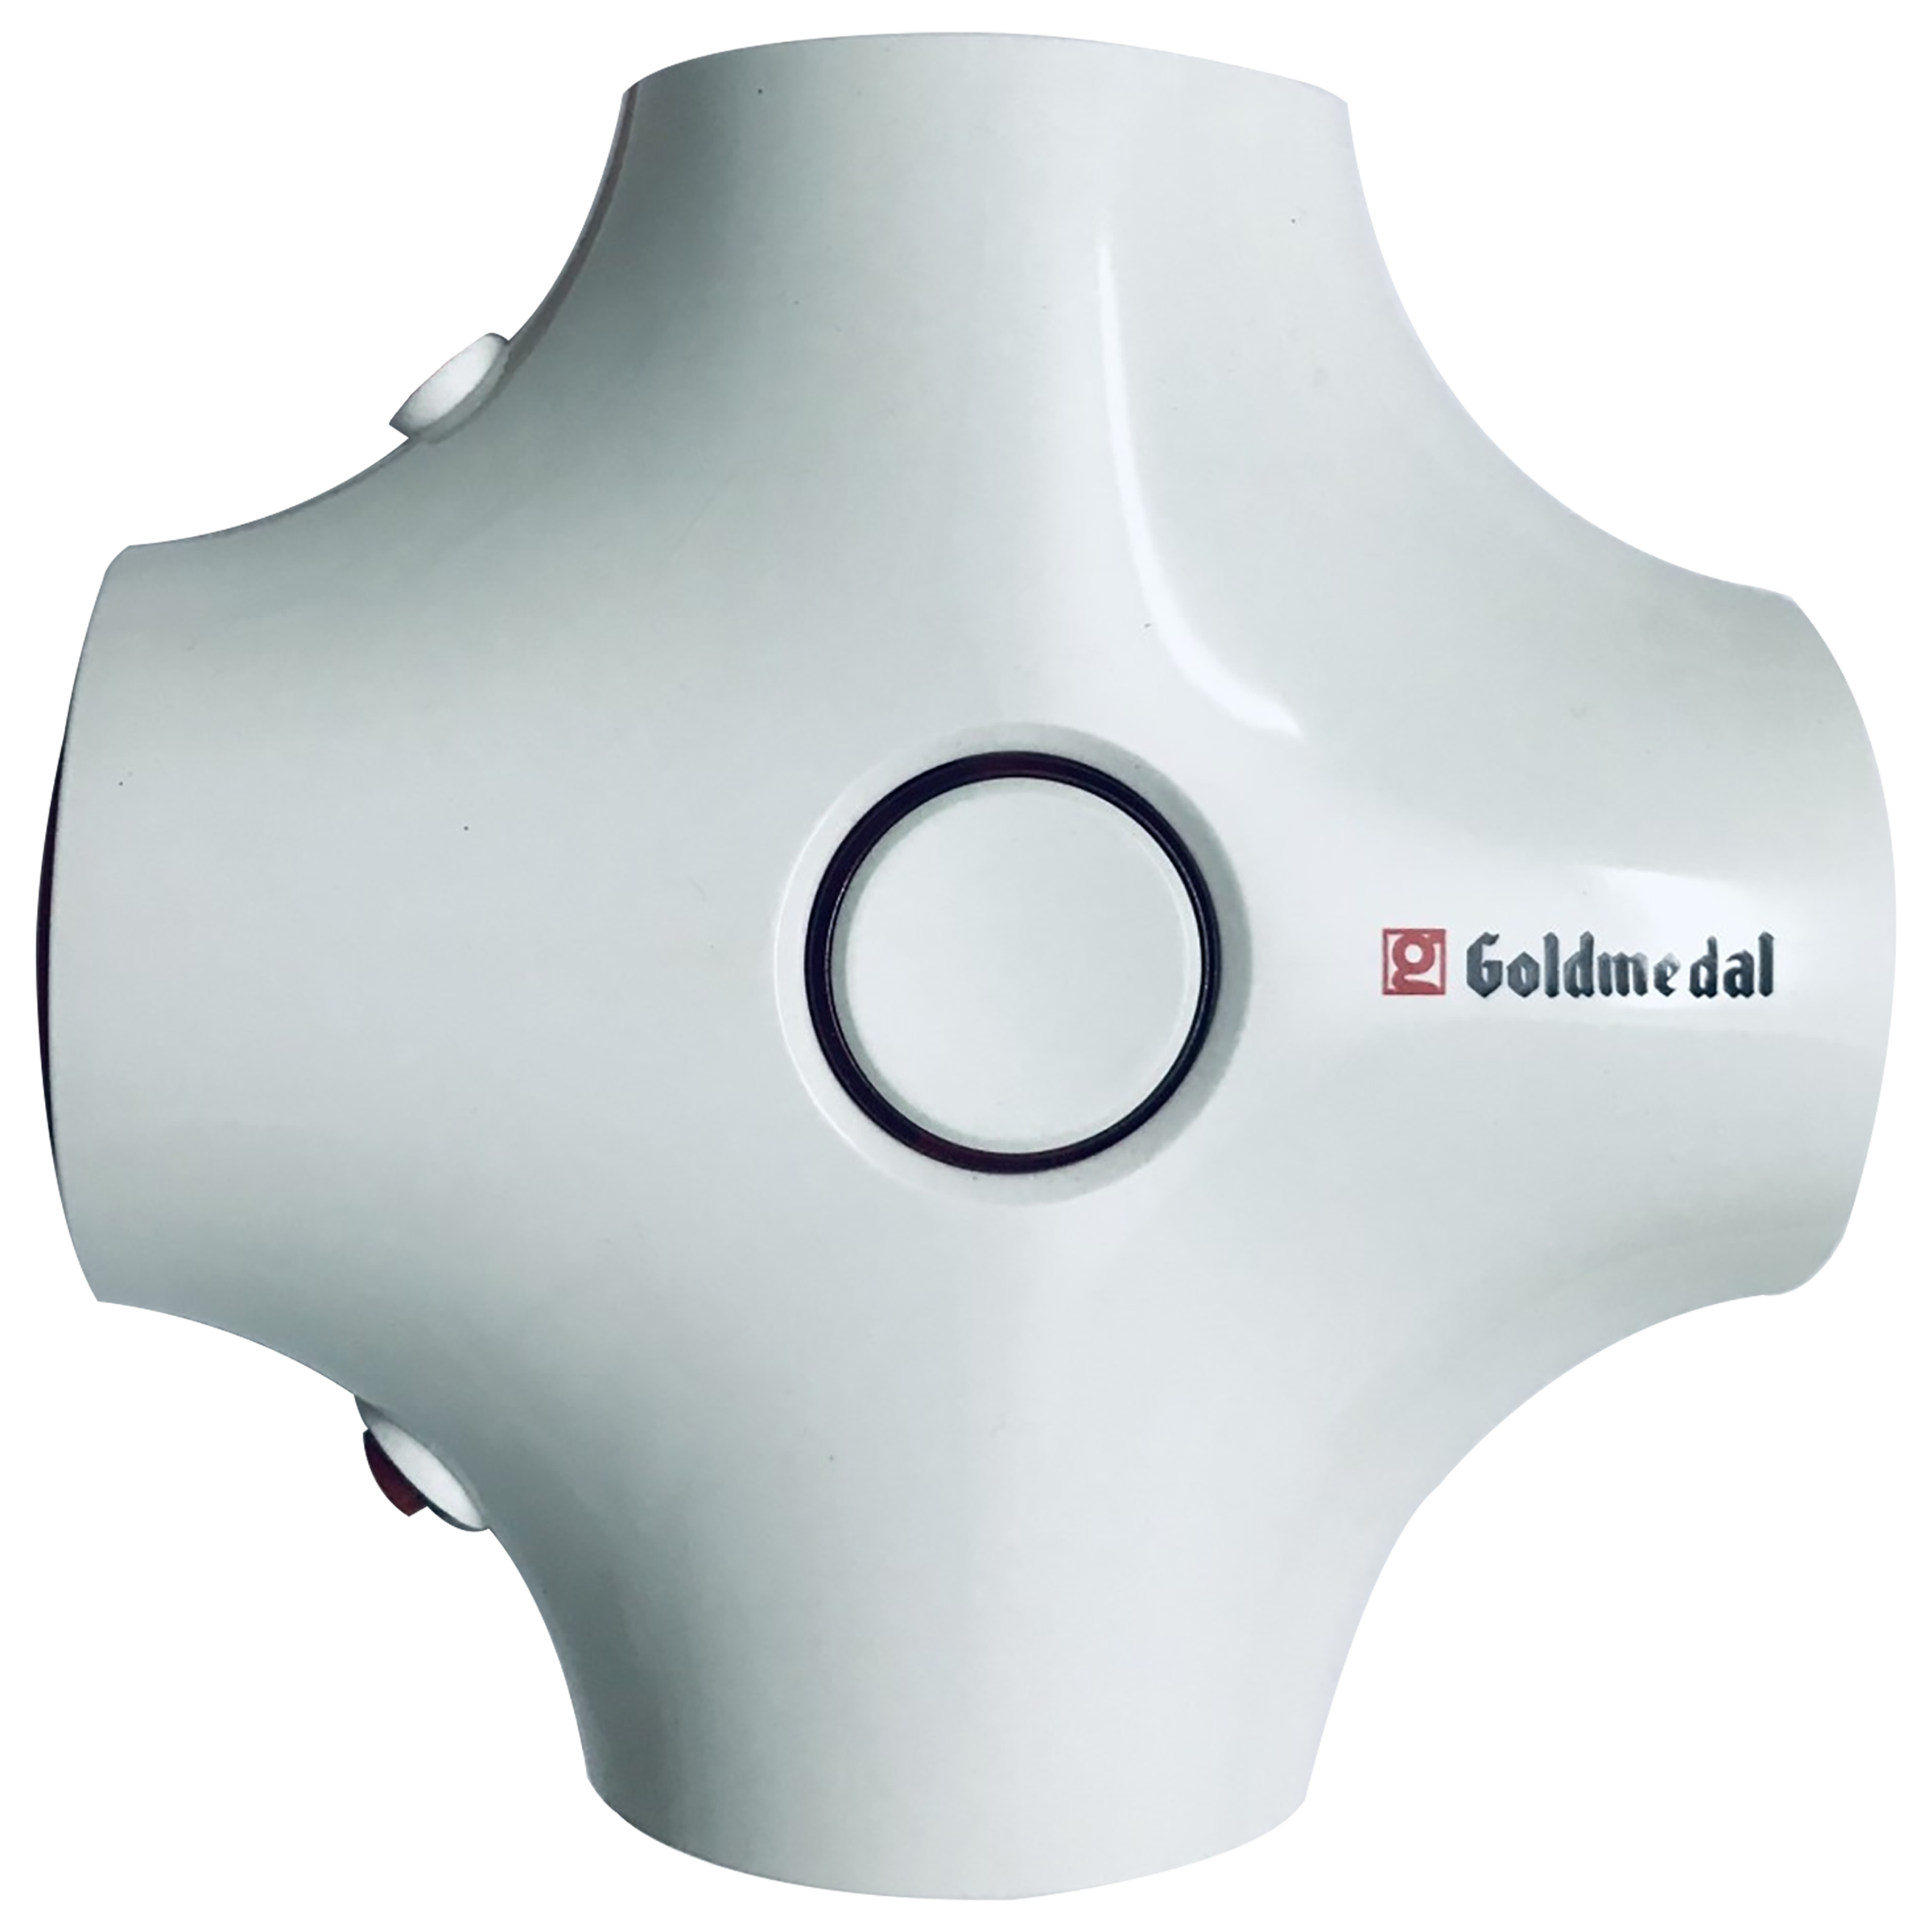 Goldmedal - Goldmedal Curve Plus 10 Amp 4 Sockets Spike Guard With Individual Switch 2 Meters (LED Indicator, 205108, White/Red)